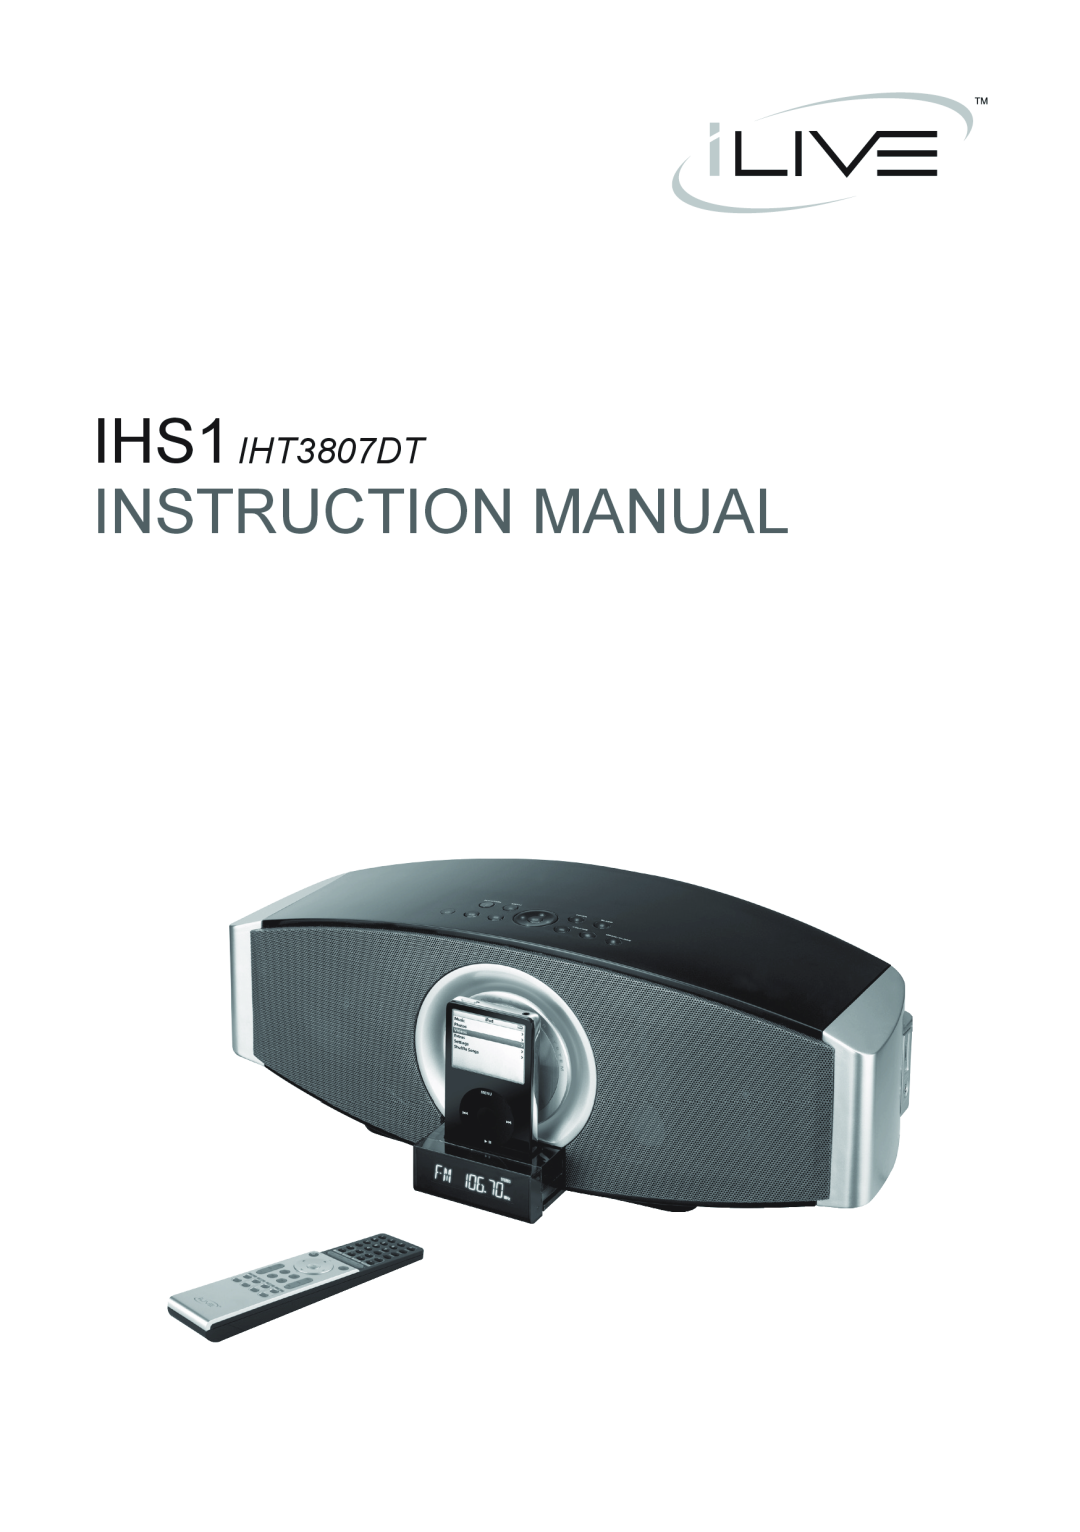 iLive IHS1 IHT3807DT instruction manual 